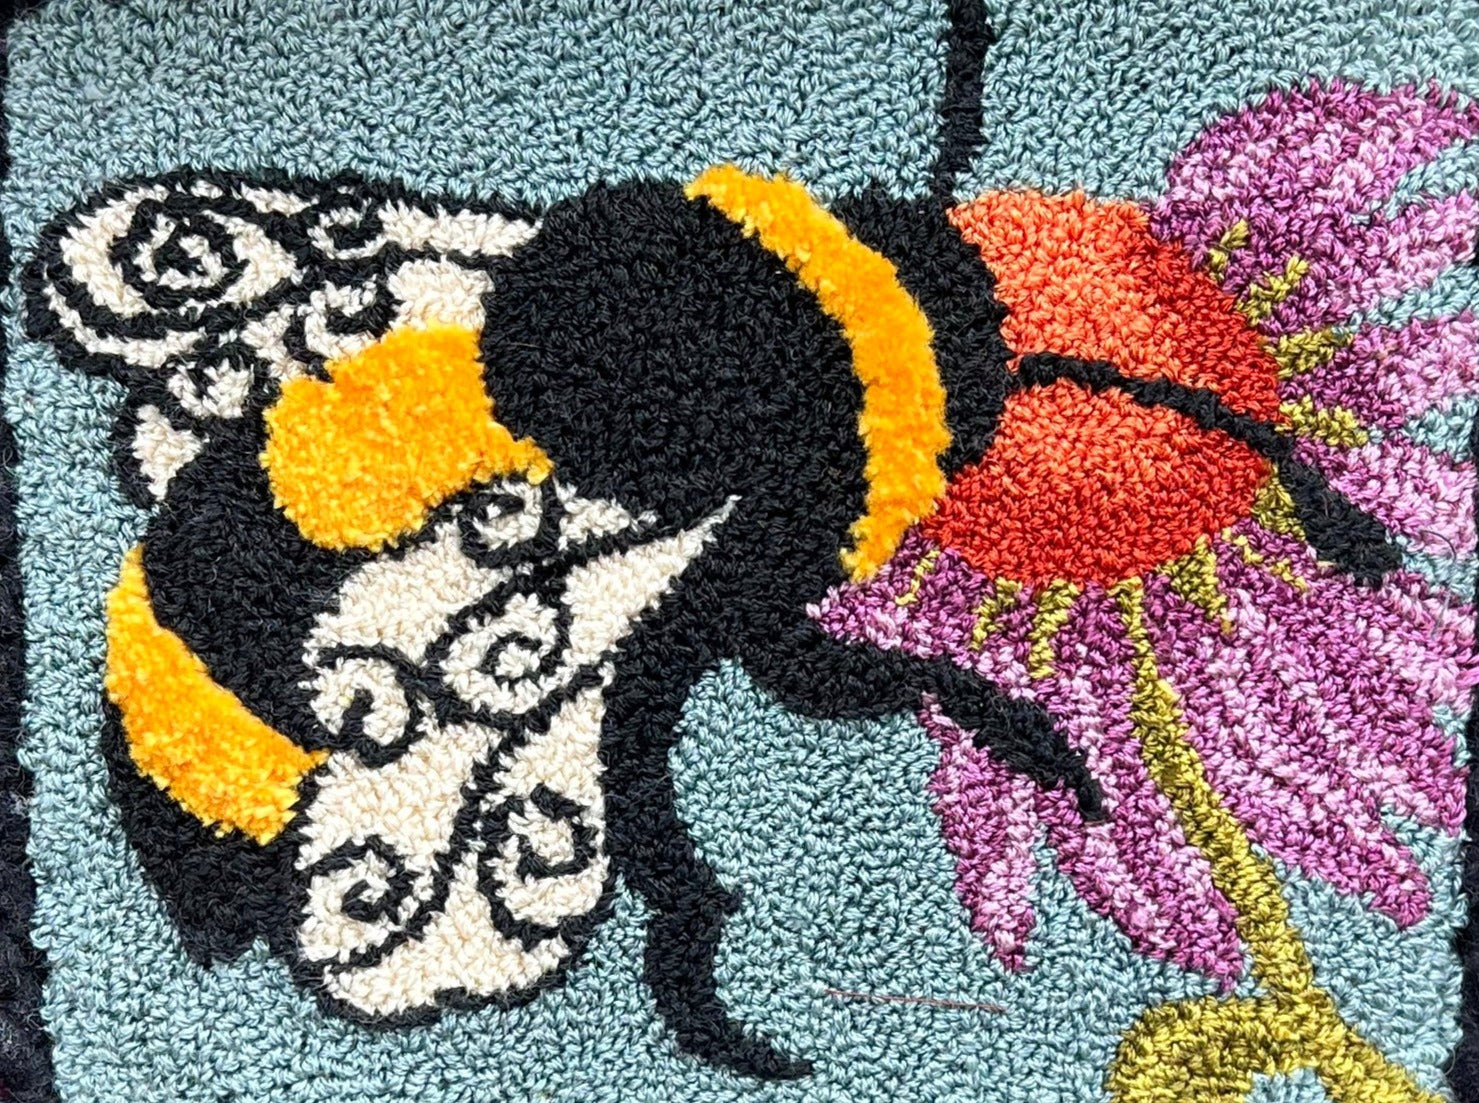  A Bee's Kiss- Paper Rug Hooking Pattern, by Orphaned Wool, Copyright © 2023 Kelly Kanyok. This is a beautifully designed pattern of a bumblebee feeding from a colorful flower. Paper patterns are designed for enlargement.